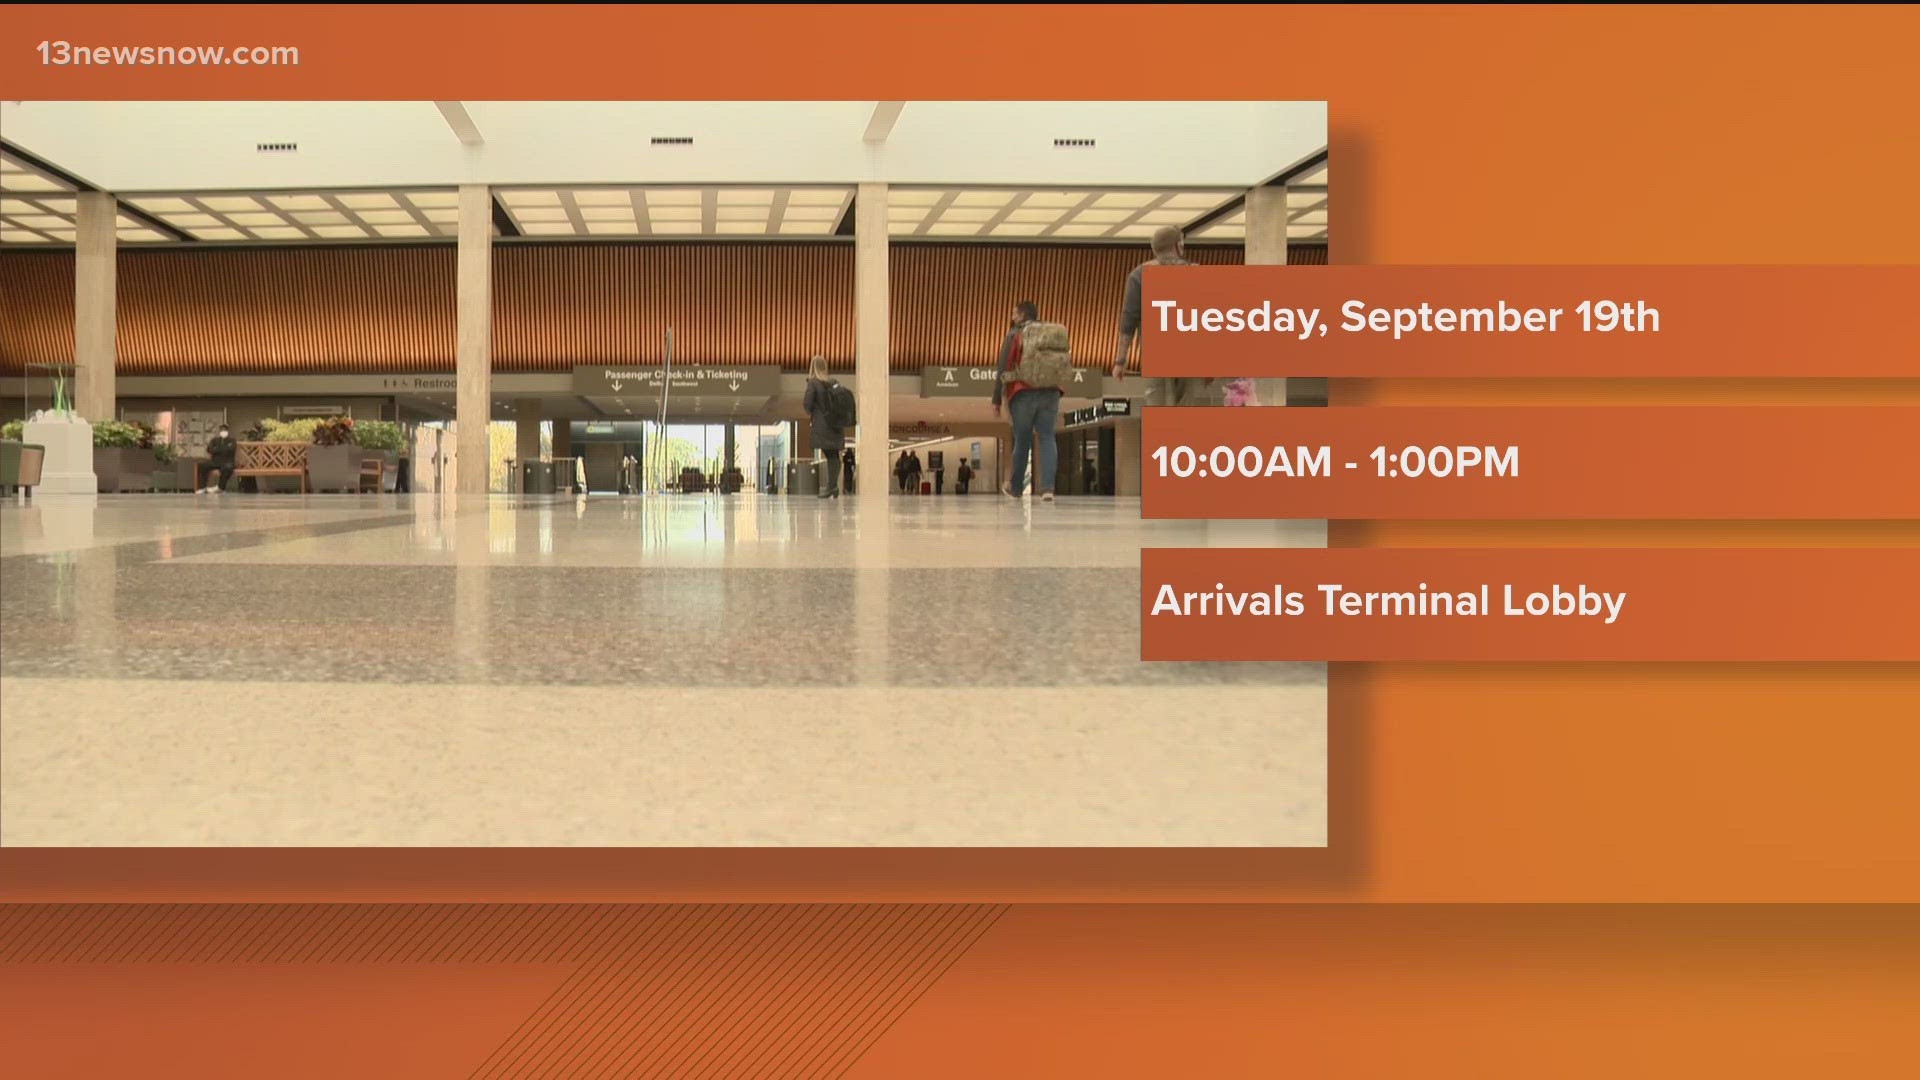 It's from 10 a.m. until 1 p.m. in the arrivals terminal lobby. There are full and part-time positions open in a variety of different departments.